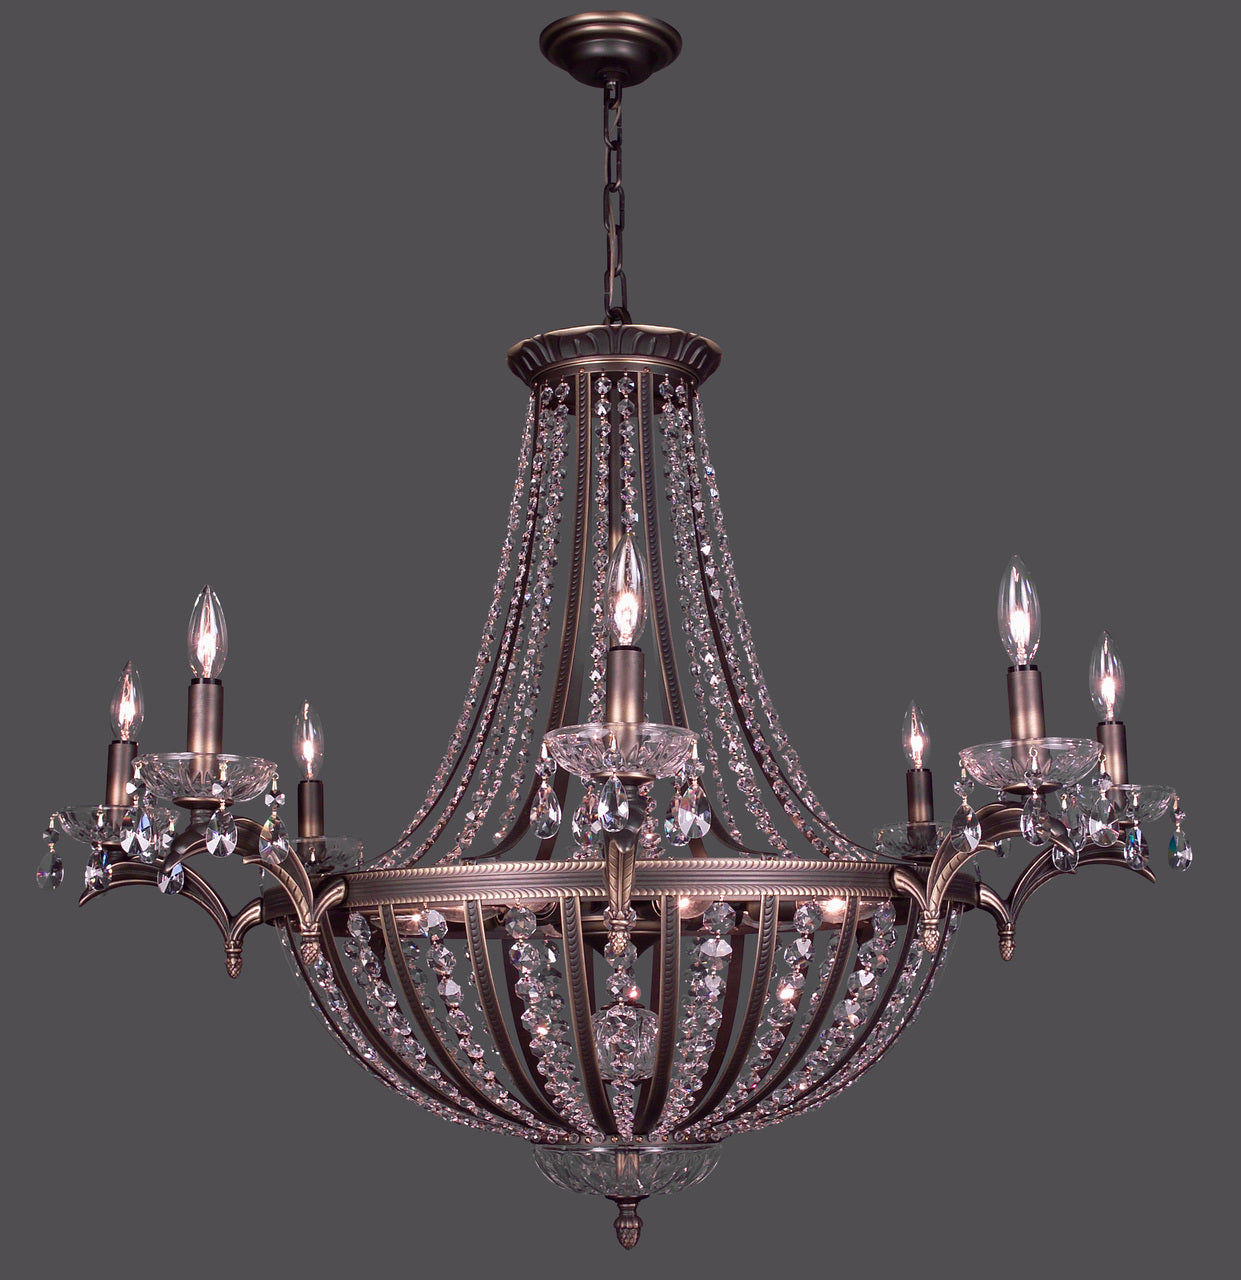 Classic Lighting 1928 RB SC Terragona Crystal Chandelier in Roman Bronze (Imported from Spain)